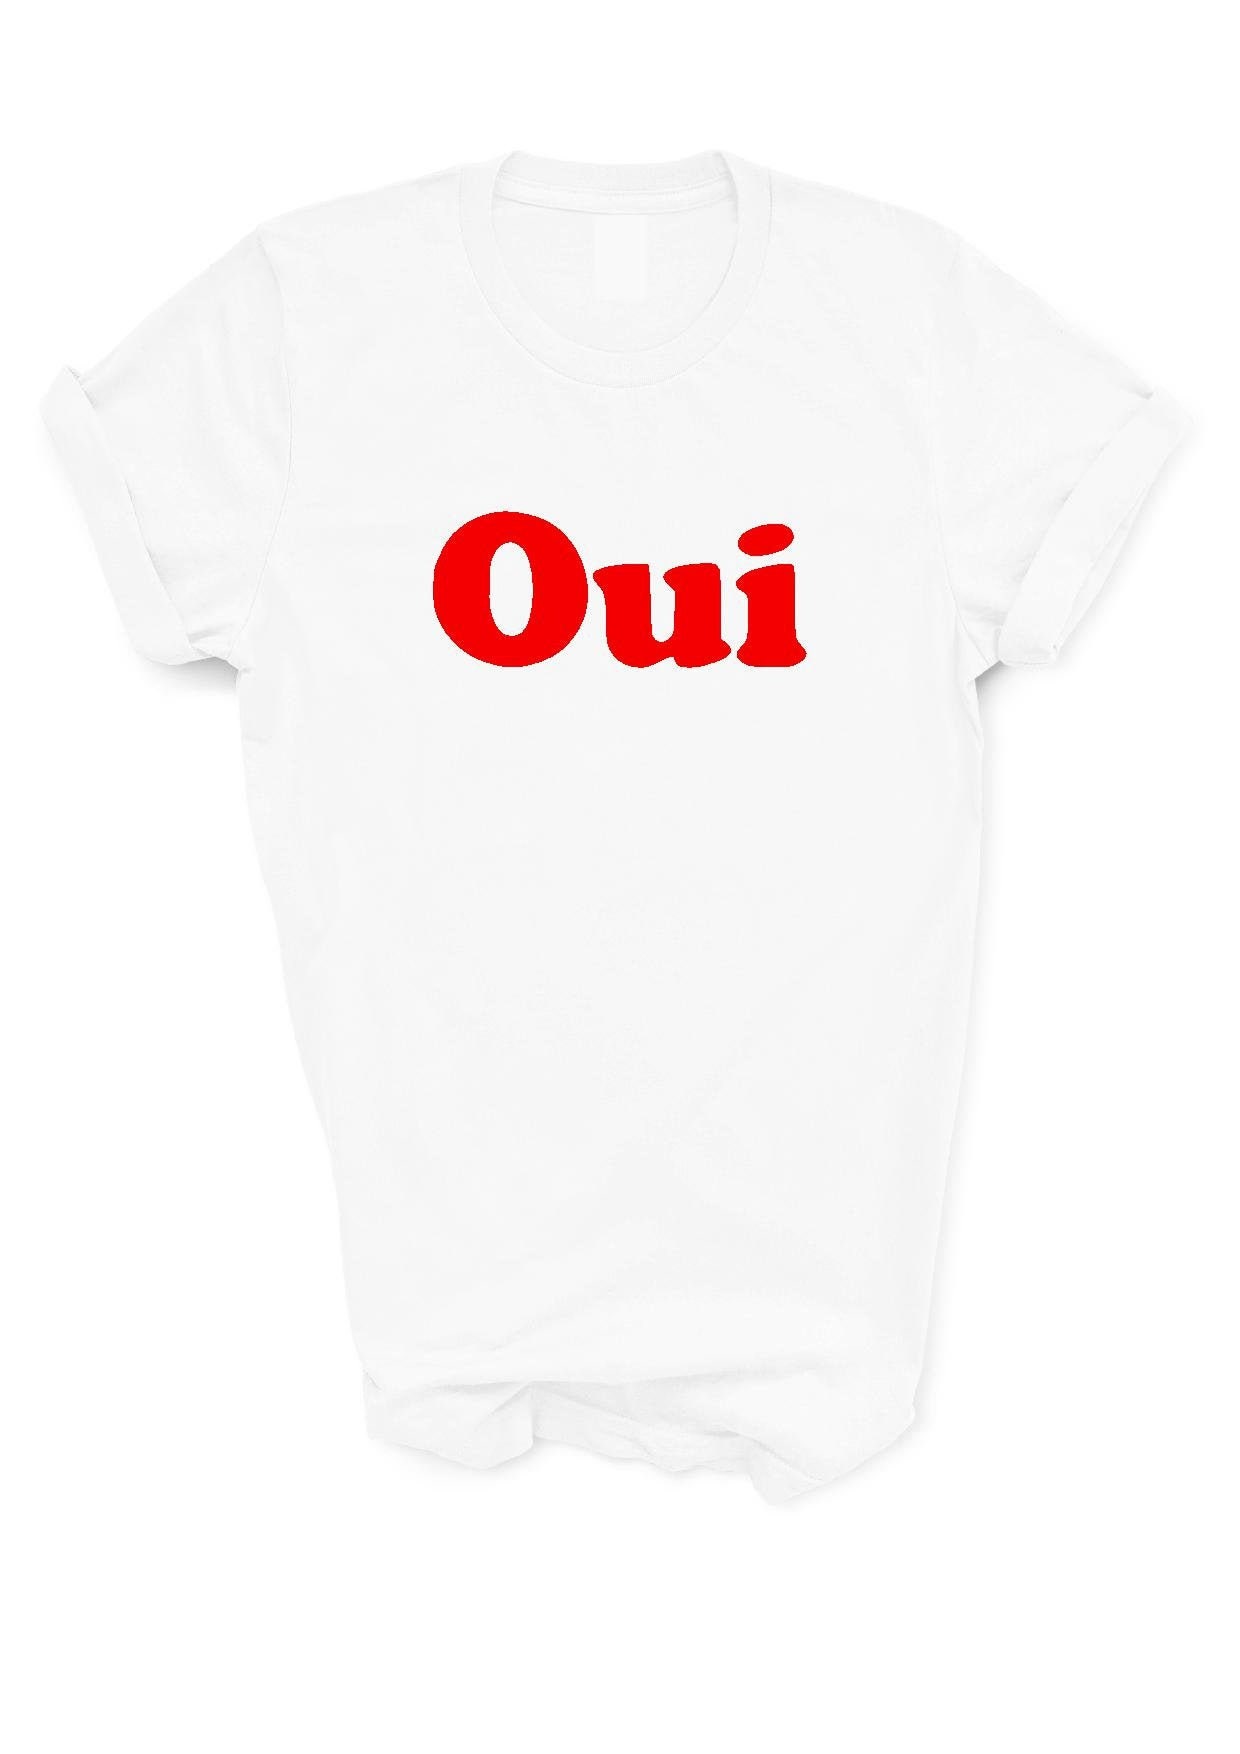 Oui T-shirt Red French Retro Slogan Hipster Tee Adult SM - Etsy